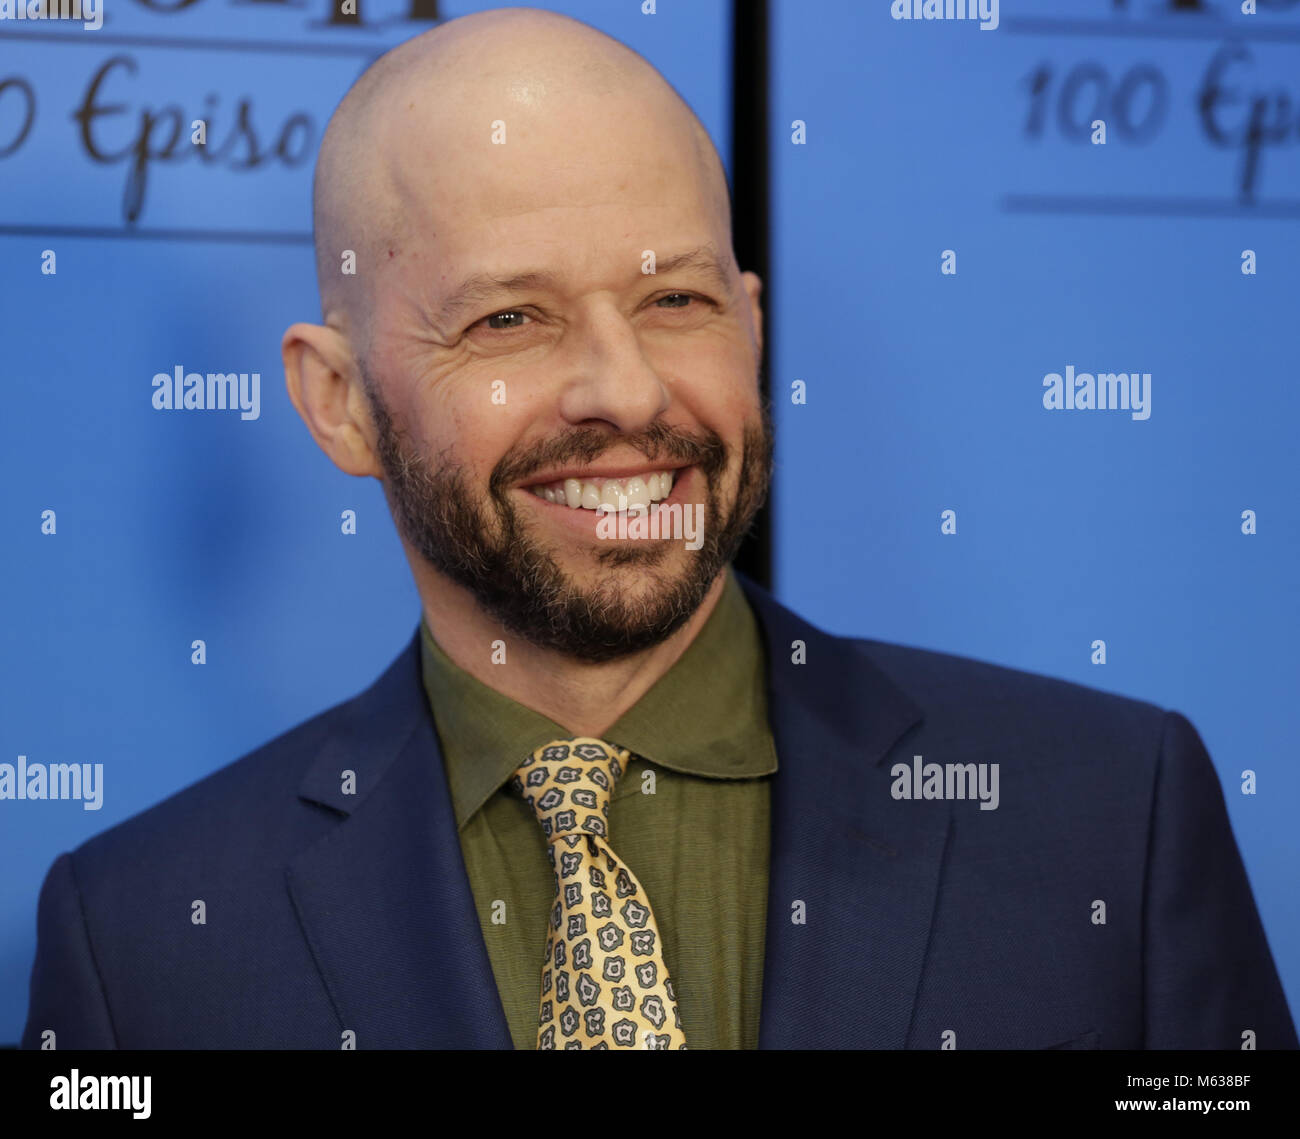 Celebrities attend CBS And Warner Bros. Television's 'Mom' Celebrates 100 Episodes at TAO Hollywood.  Featuring: Jon Cryer Where: Los Angeles, California, United States When: 28 Jan 2018 Credit: Brian To/WENN.com Stock Photo